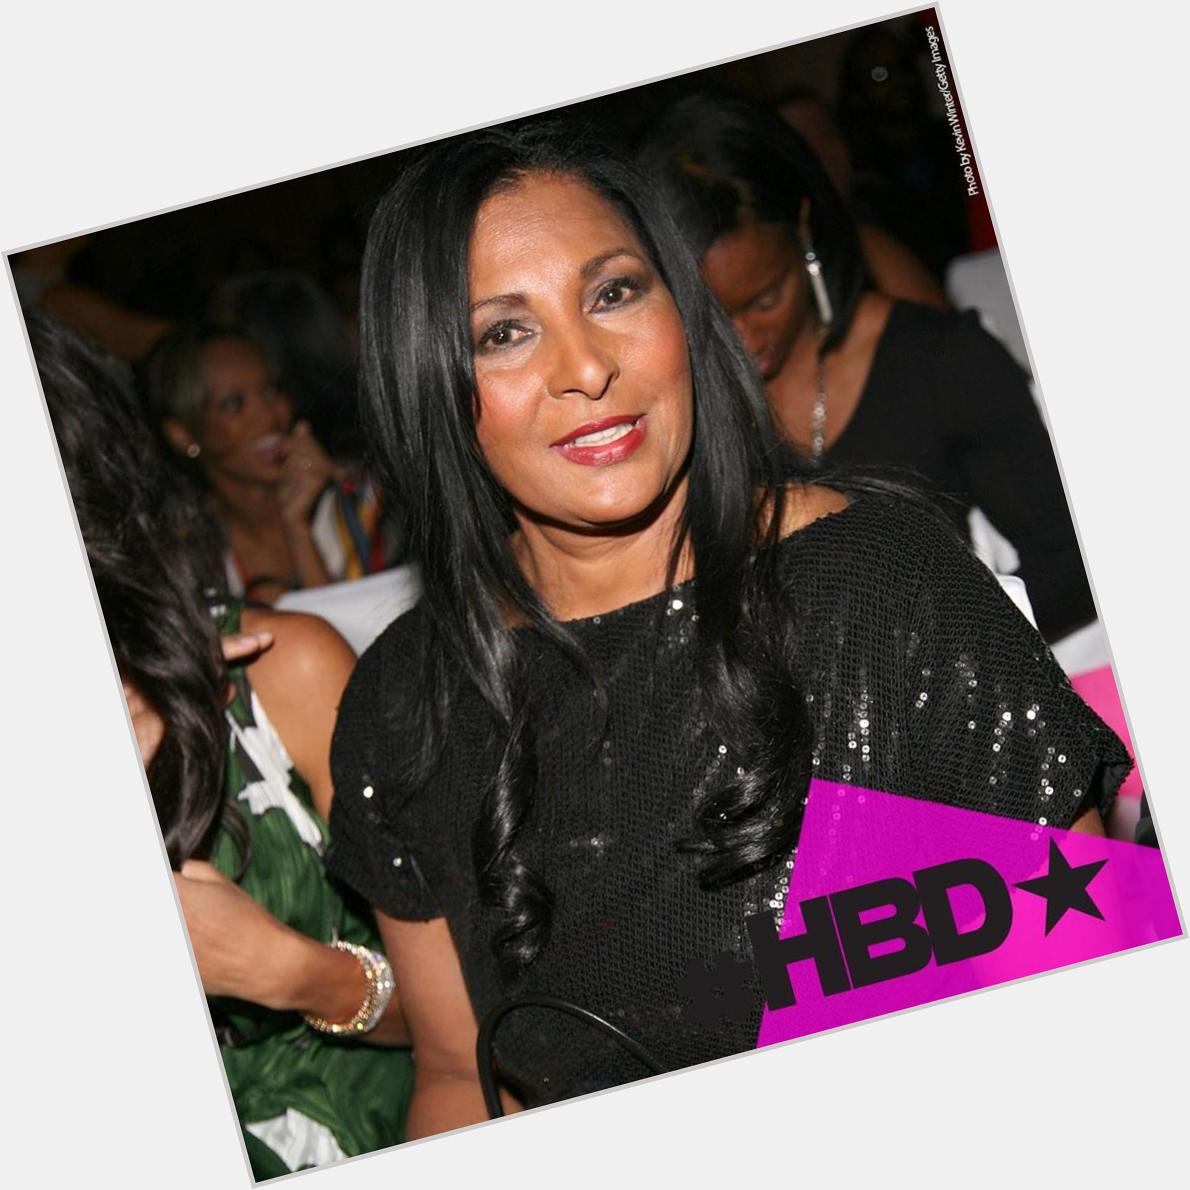 Wishing the legendary Pam Grier a Happy 68th Birthday! 